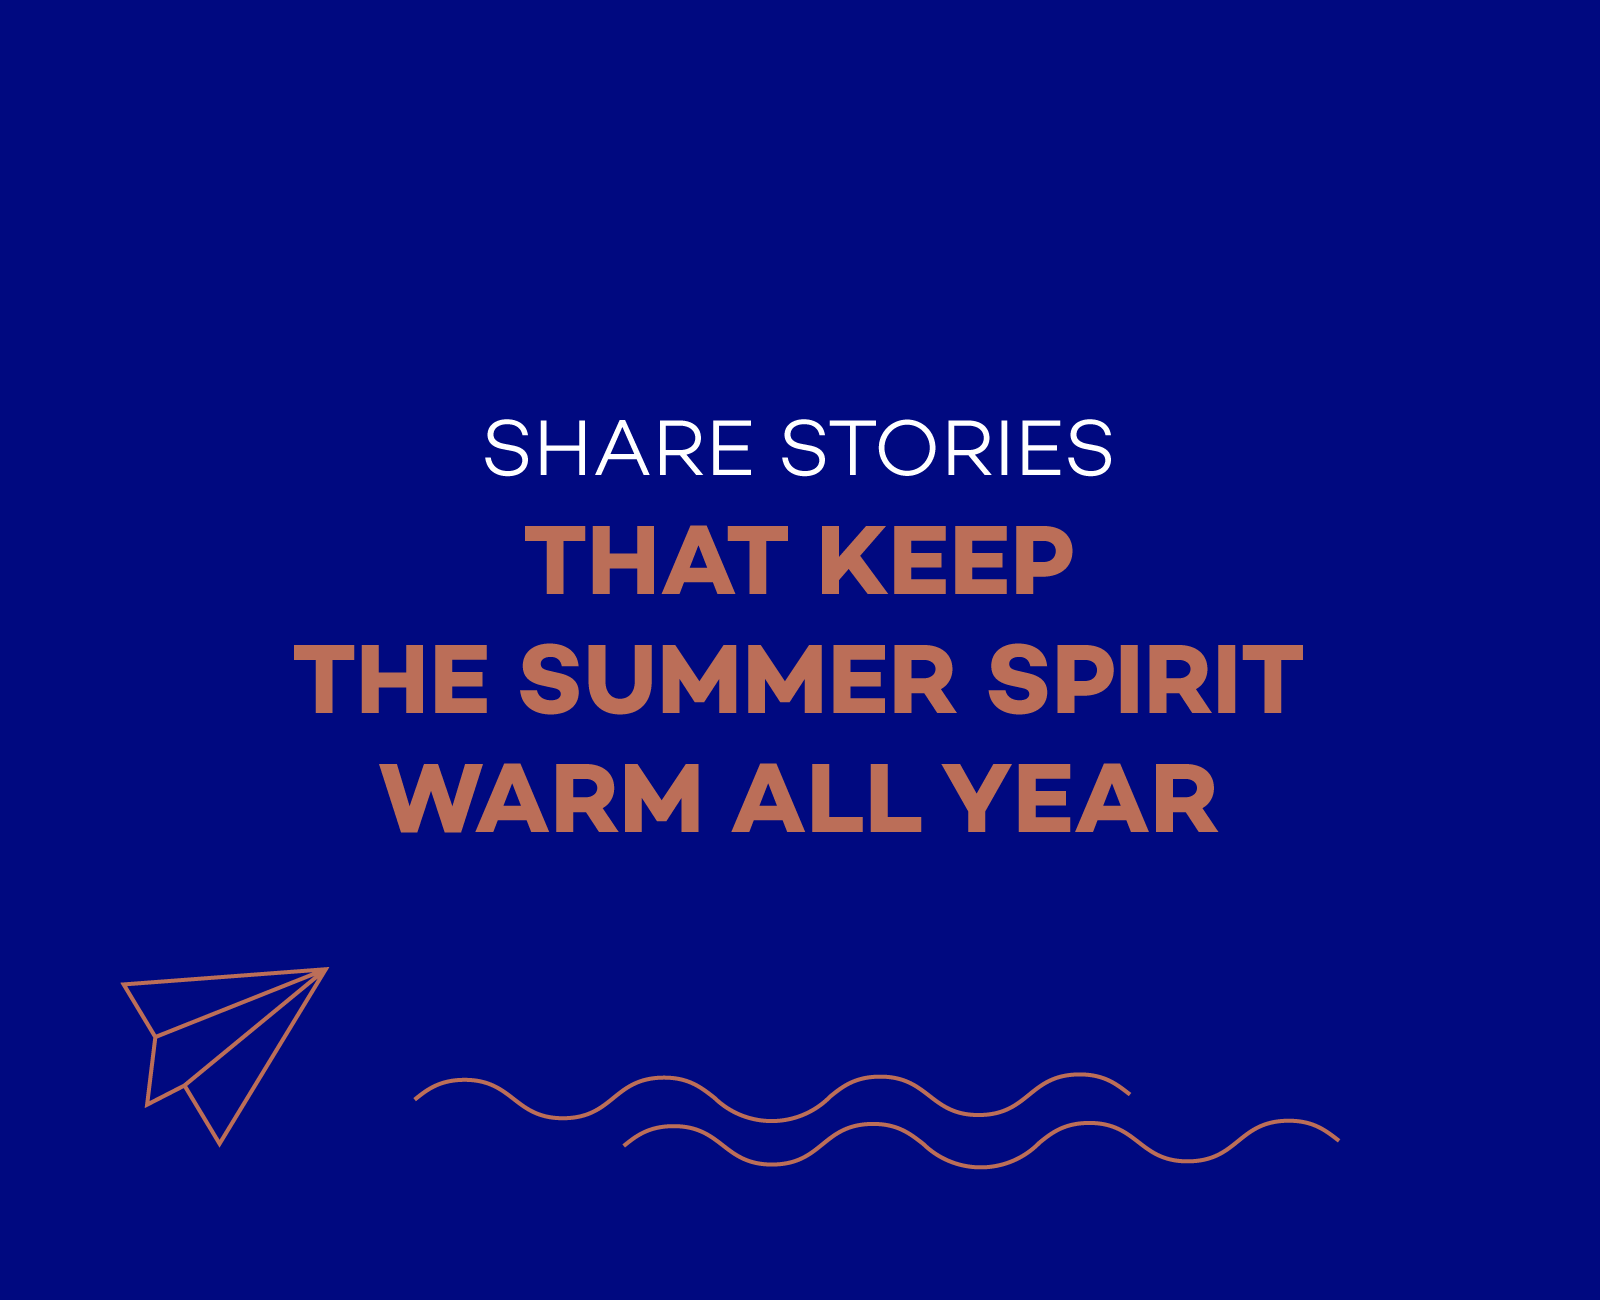 Share stories that keep the summer spirit warm all year